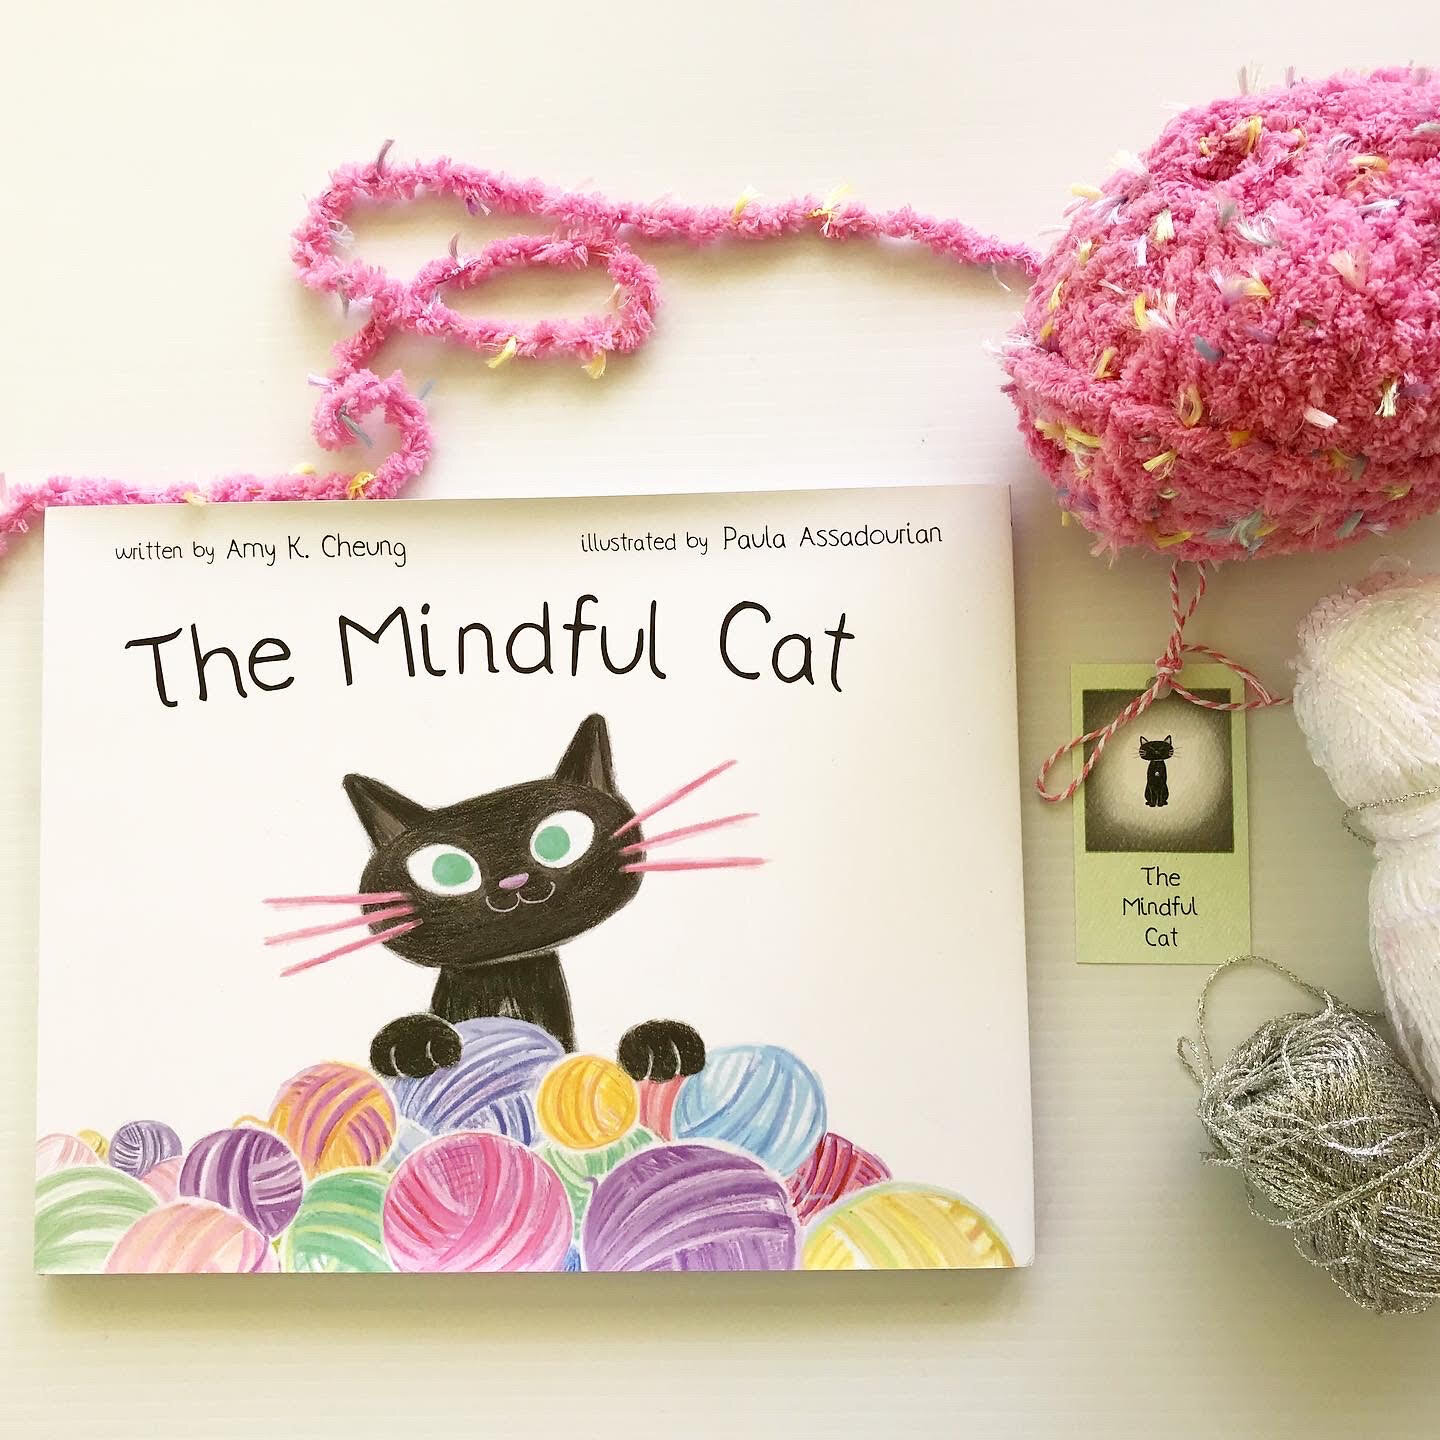 The Mindful Cat